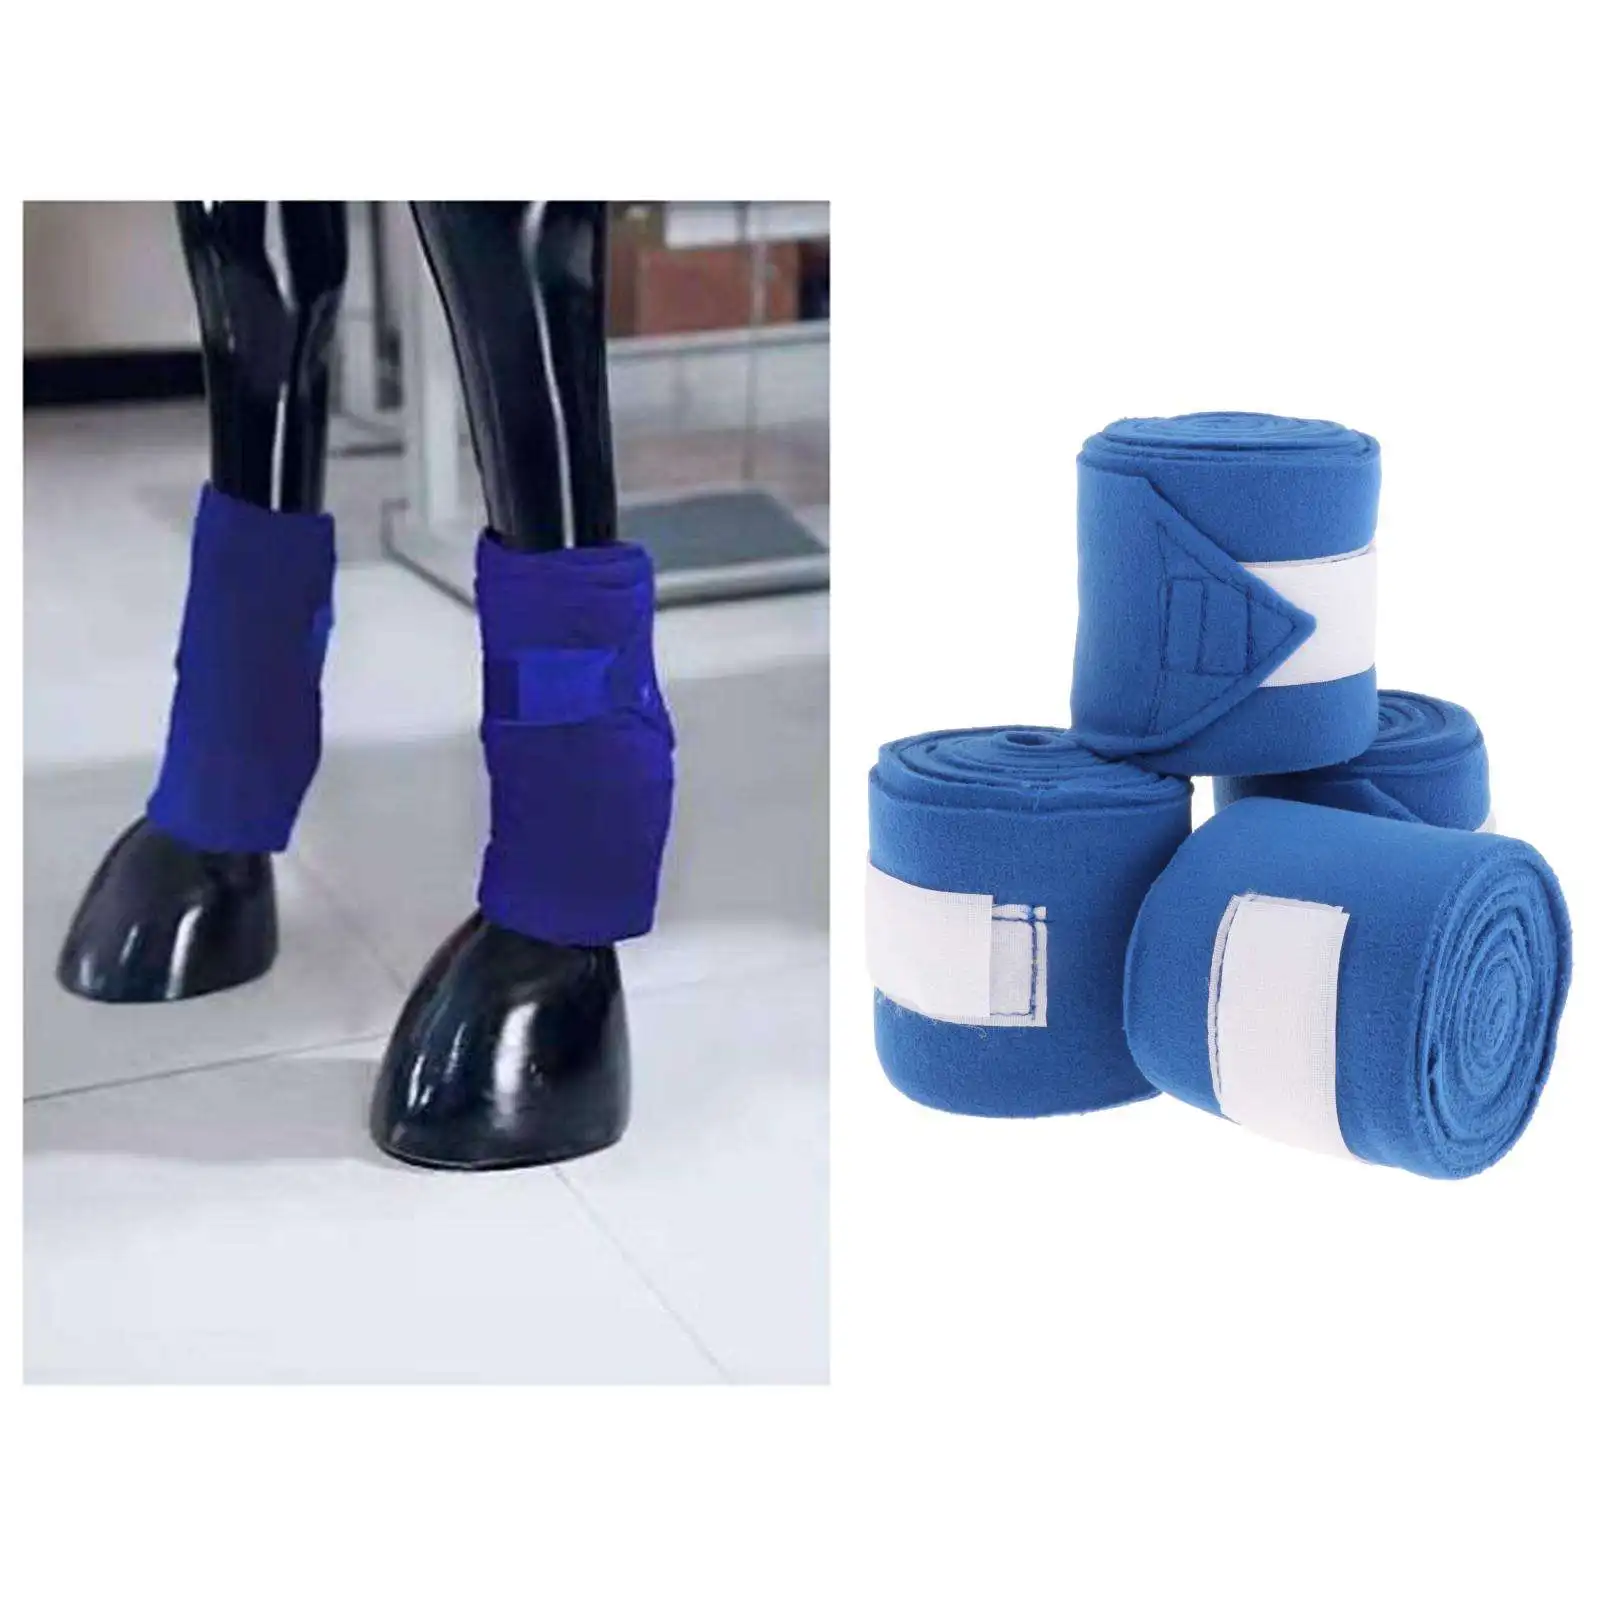 Protective Boots for Horse Legs, Shockproof Horse Boots for Horse Riding Jump Protection Equestrian Equipment